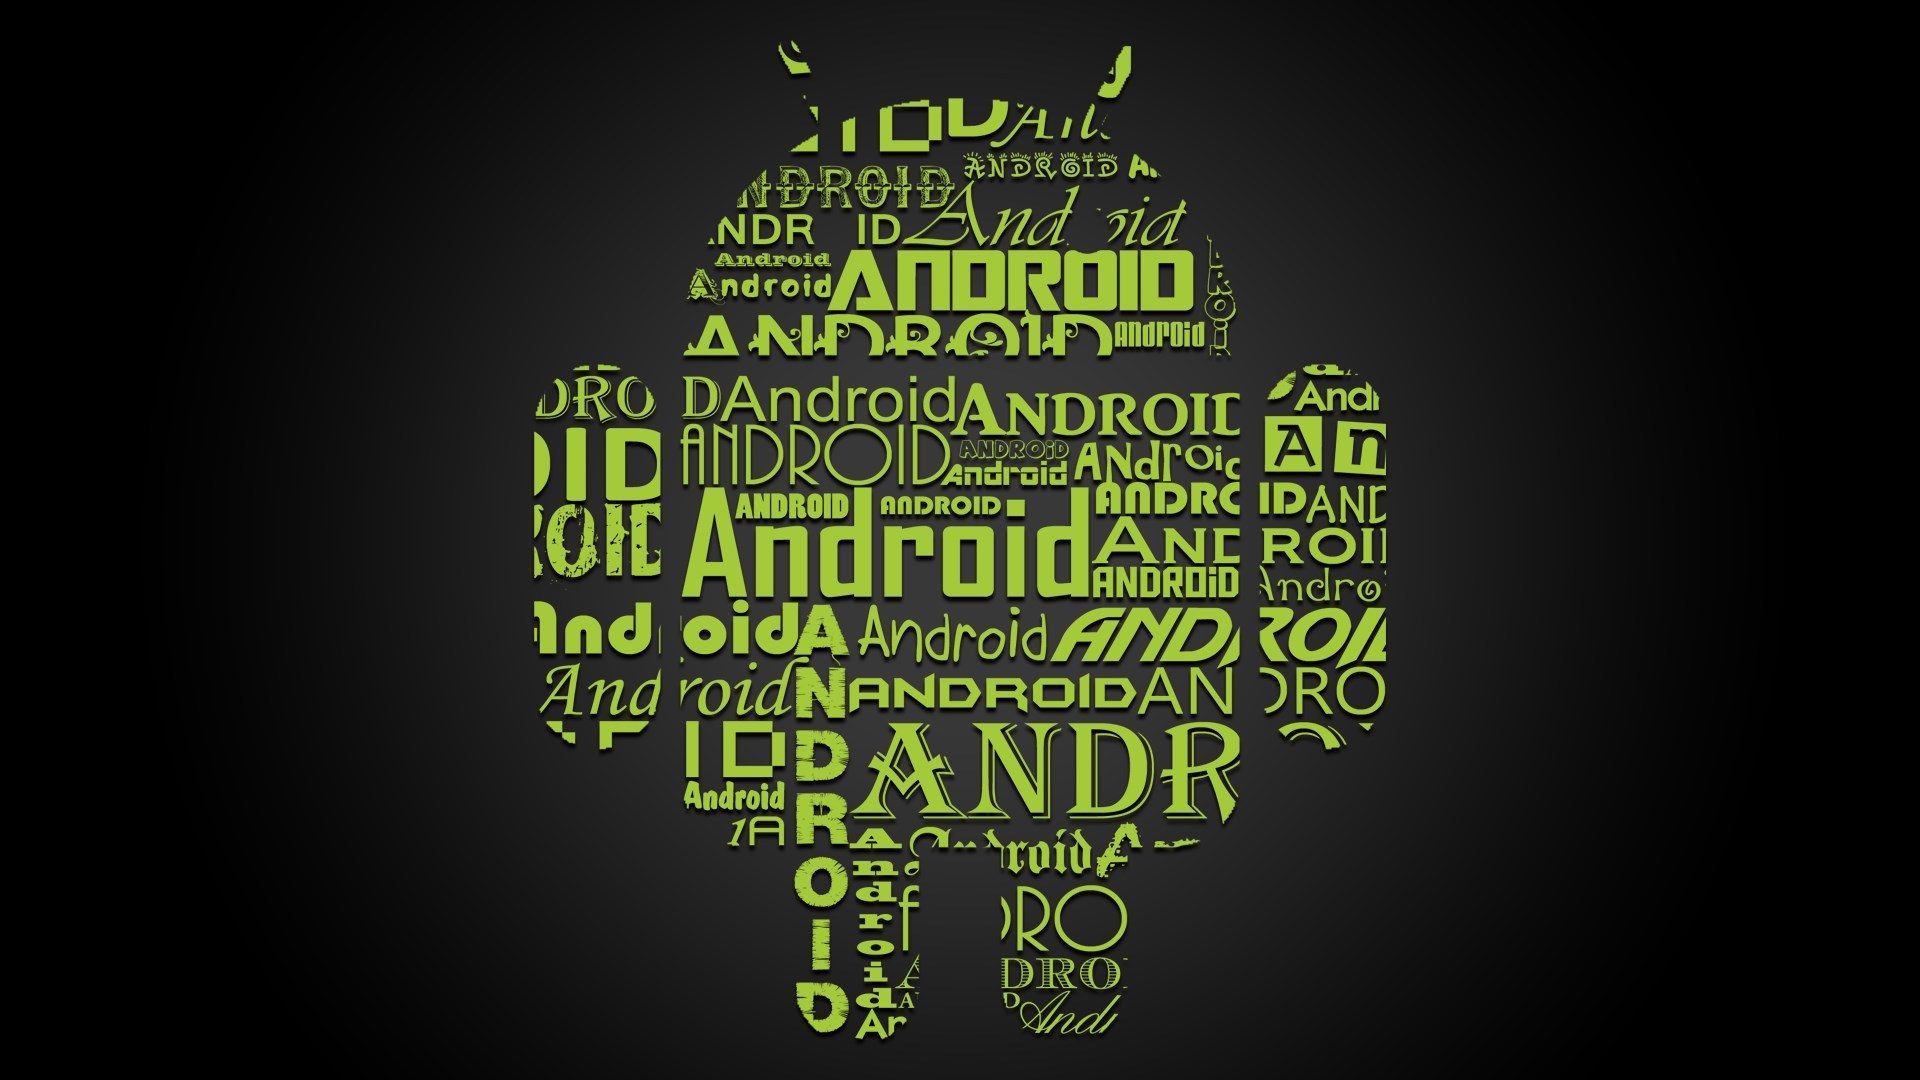 Best Desktop Wallpaper for Android Lovers. Android technology, HD wallpaper android, App development